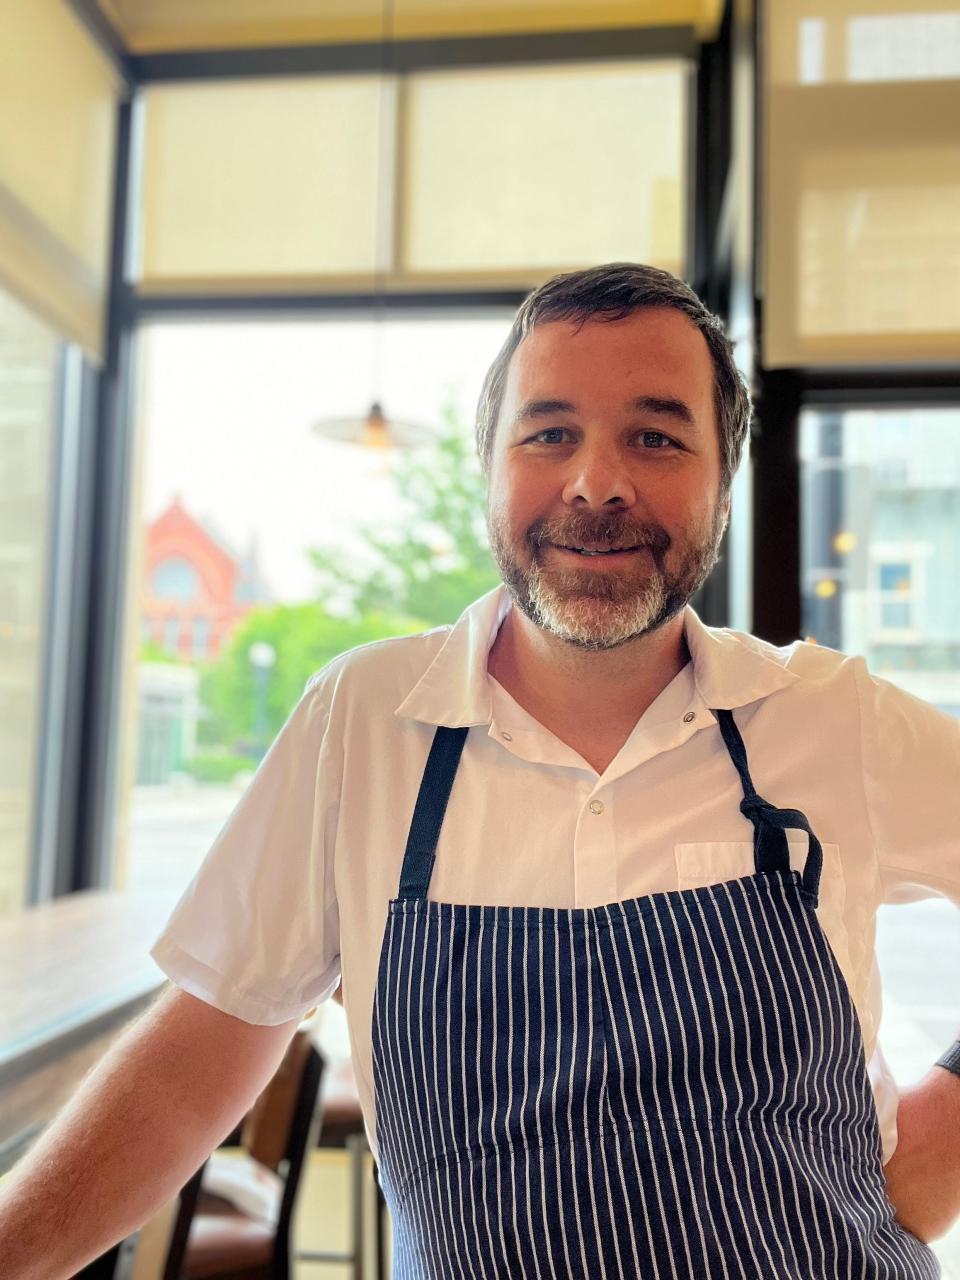 Chef and owner Danny Combs will open Colette, a new French restaurant at 1400 Race Street in Over-the-Rhine, in October.